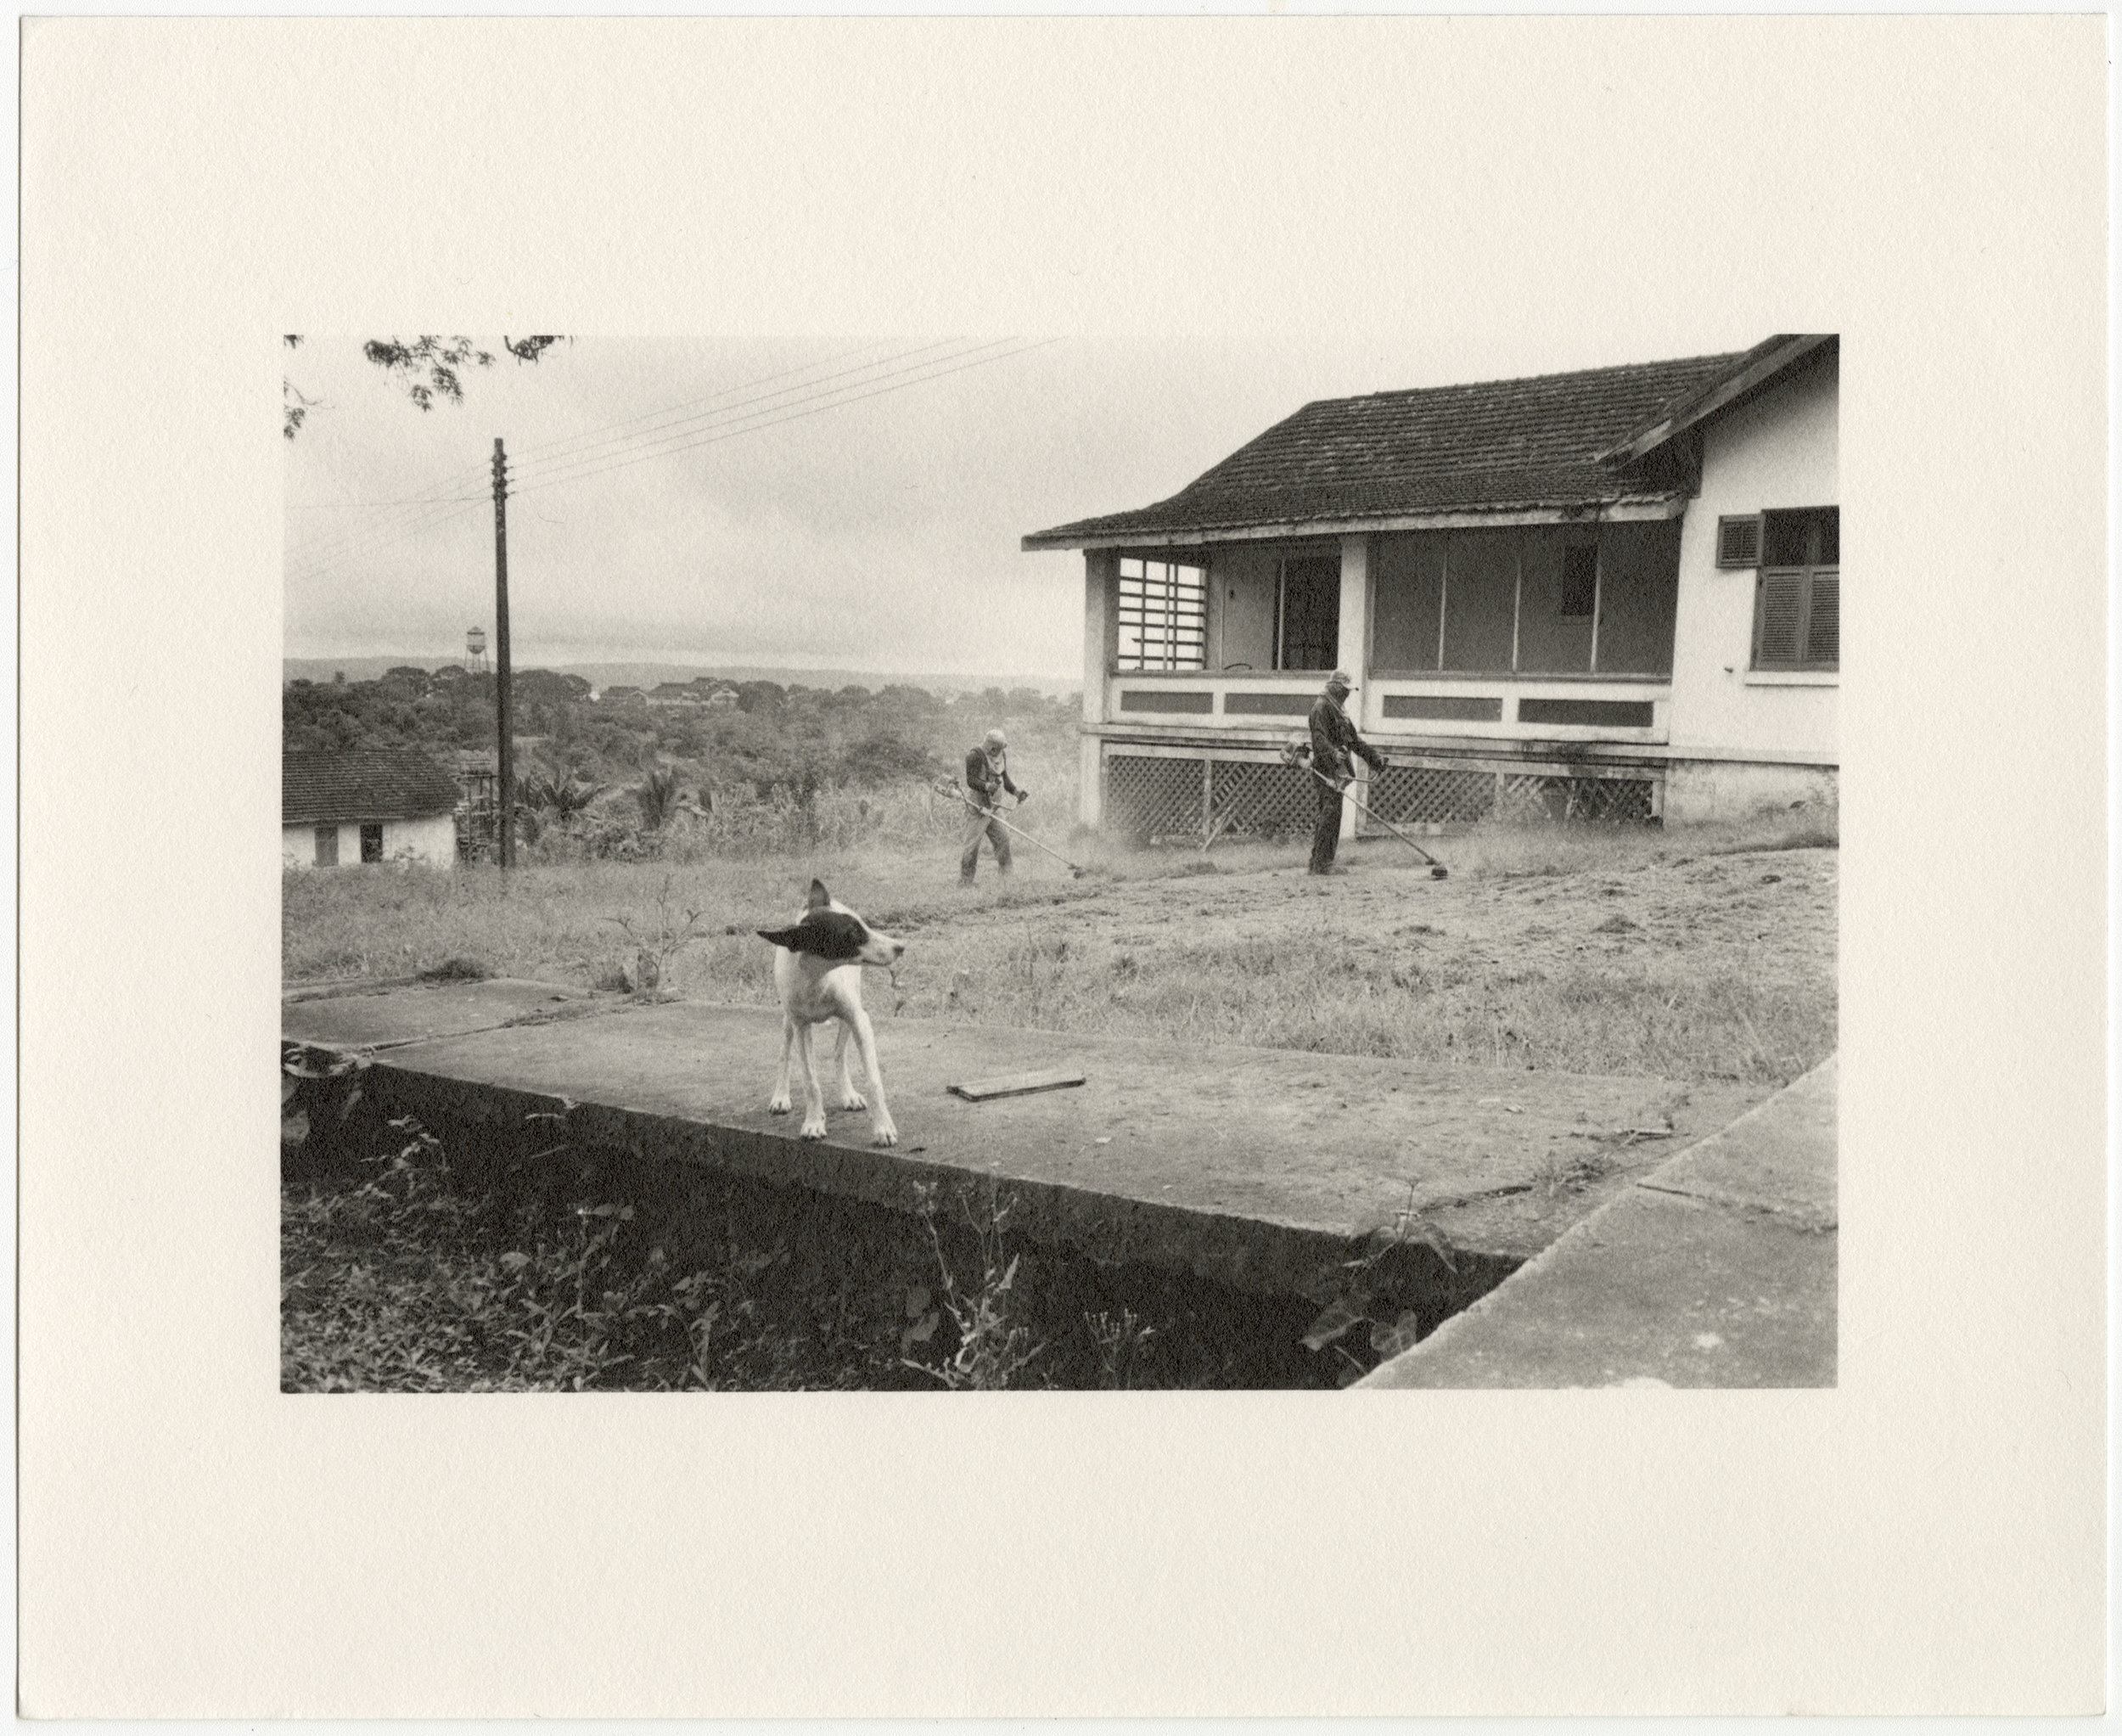  Fordlândia manager’s house on Vila Americana, with men weedwacking the front yard and dog, built in 1929 by the Companhia Ford Industrial Do Brasil Ford Motor Company. 2014, Fordlândia, Pará, Brazil. Gelatin silver fiber print, 8” x 10”, 2014/2018 